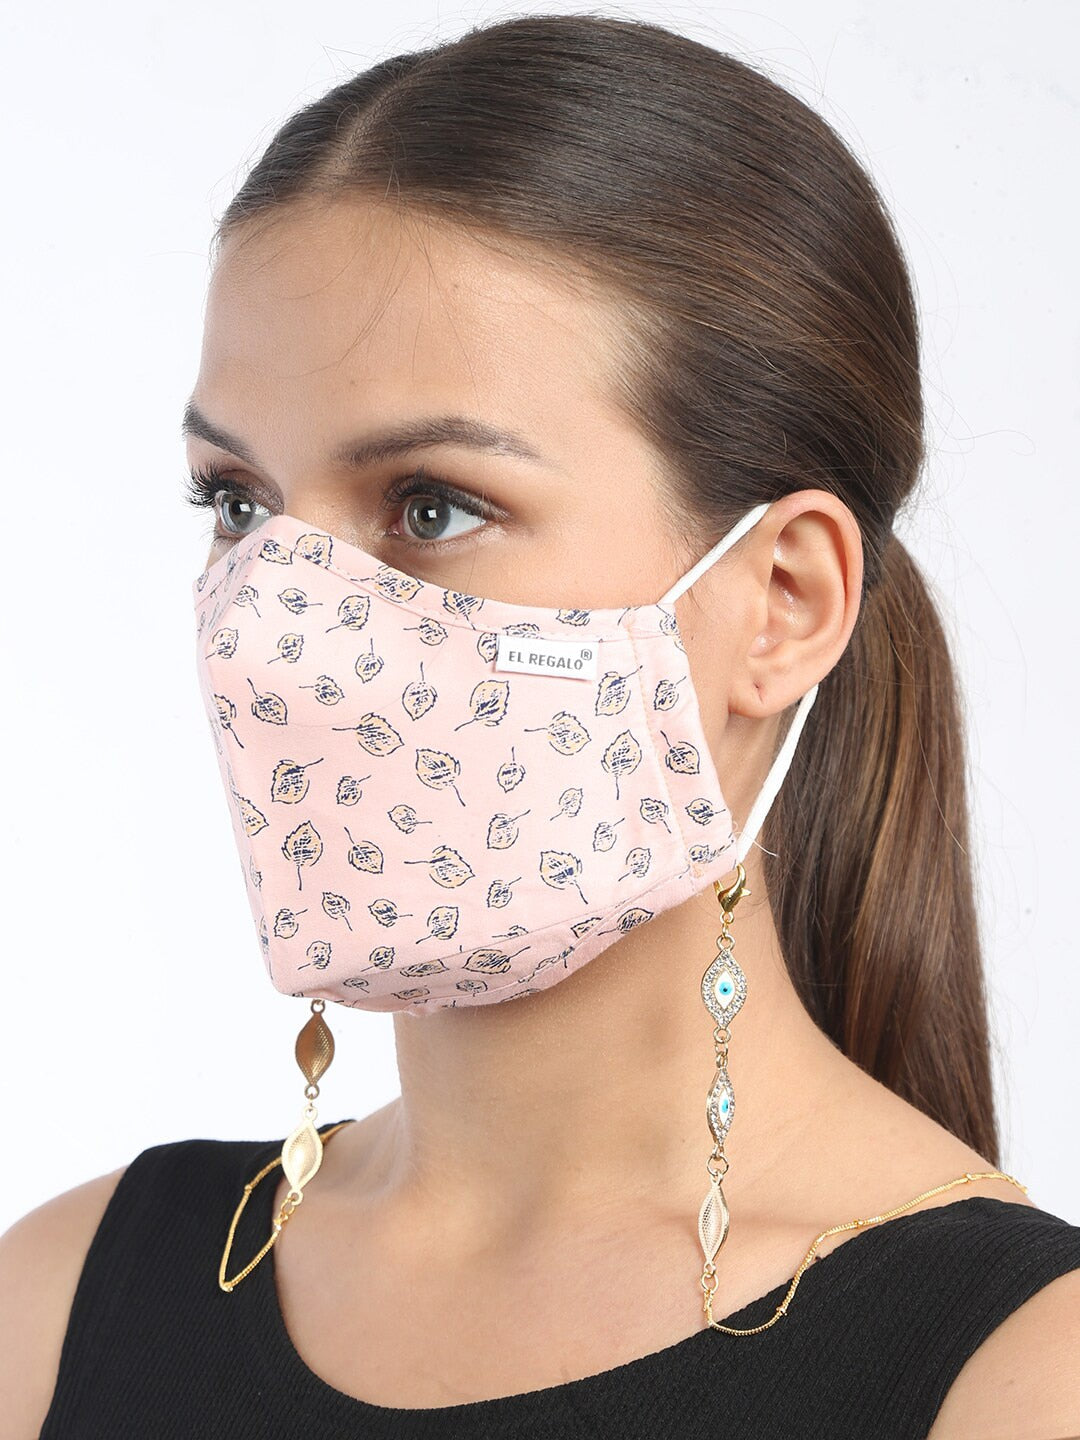 EL REGALO Women Gold-Toned & White Stone-Studded Mask Chains - for Women and Girls
Style ID: 17223070